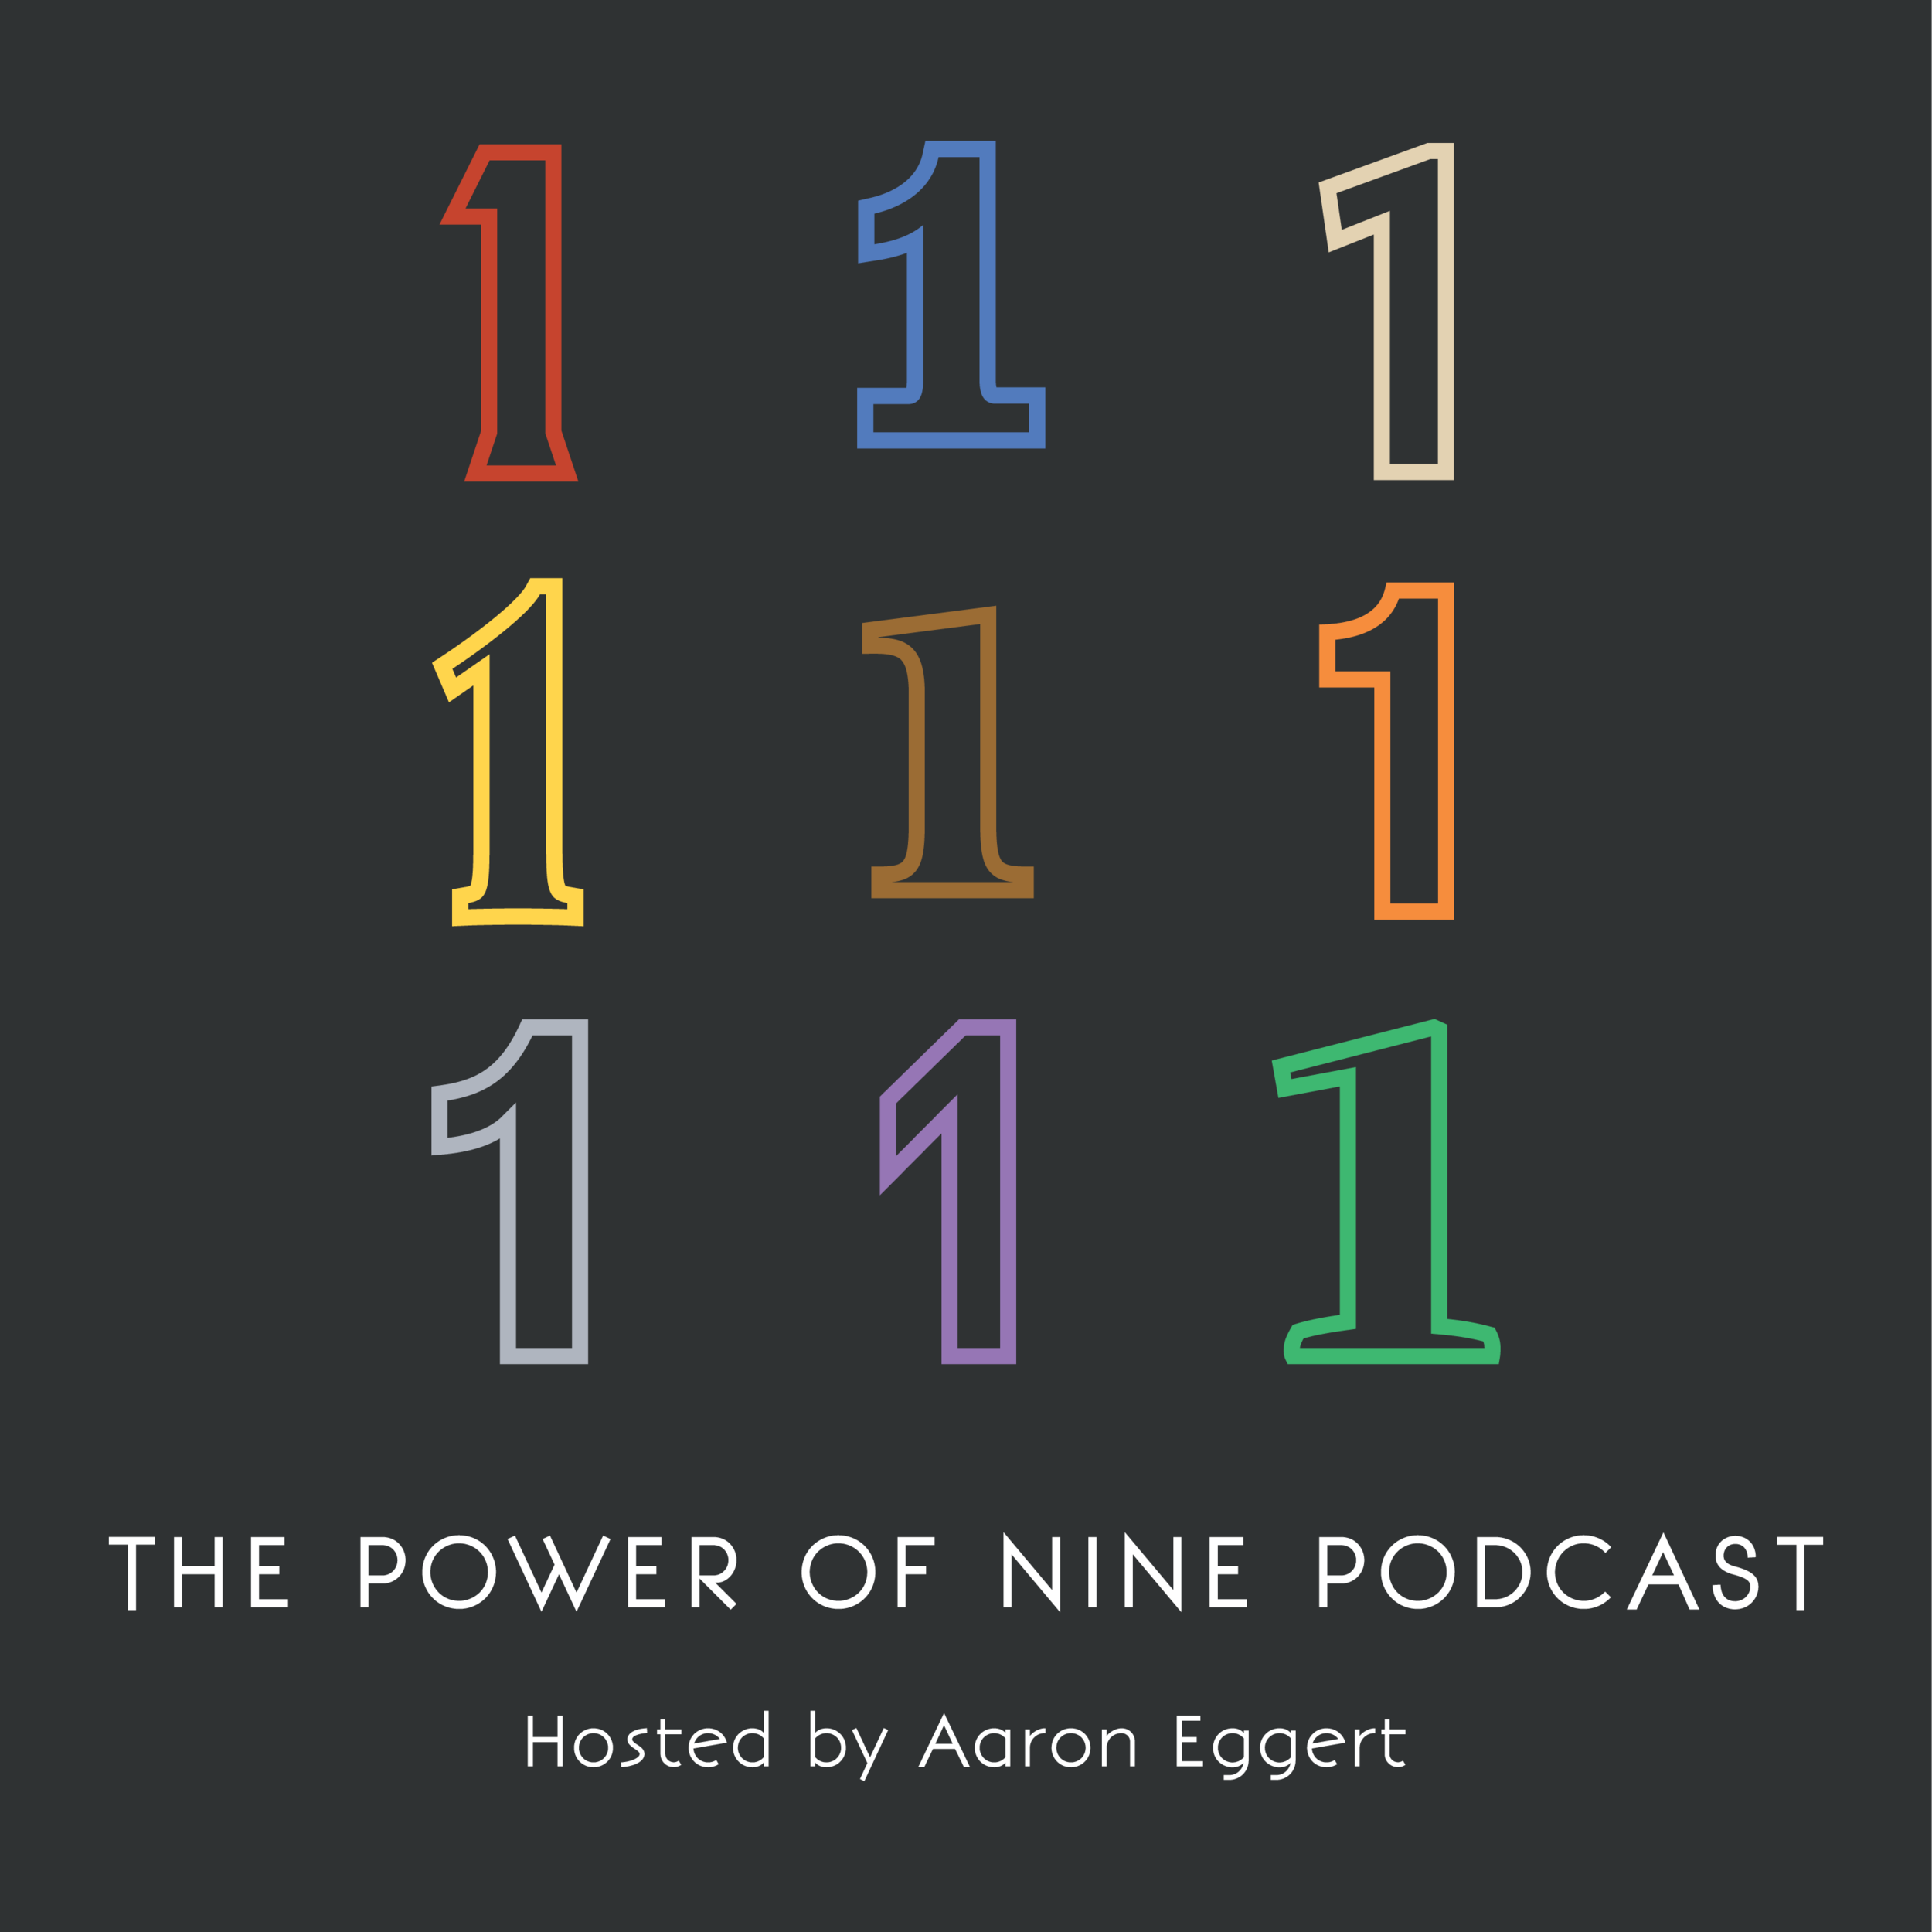 The Power of Nine Podcast